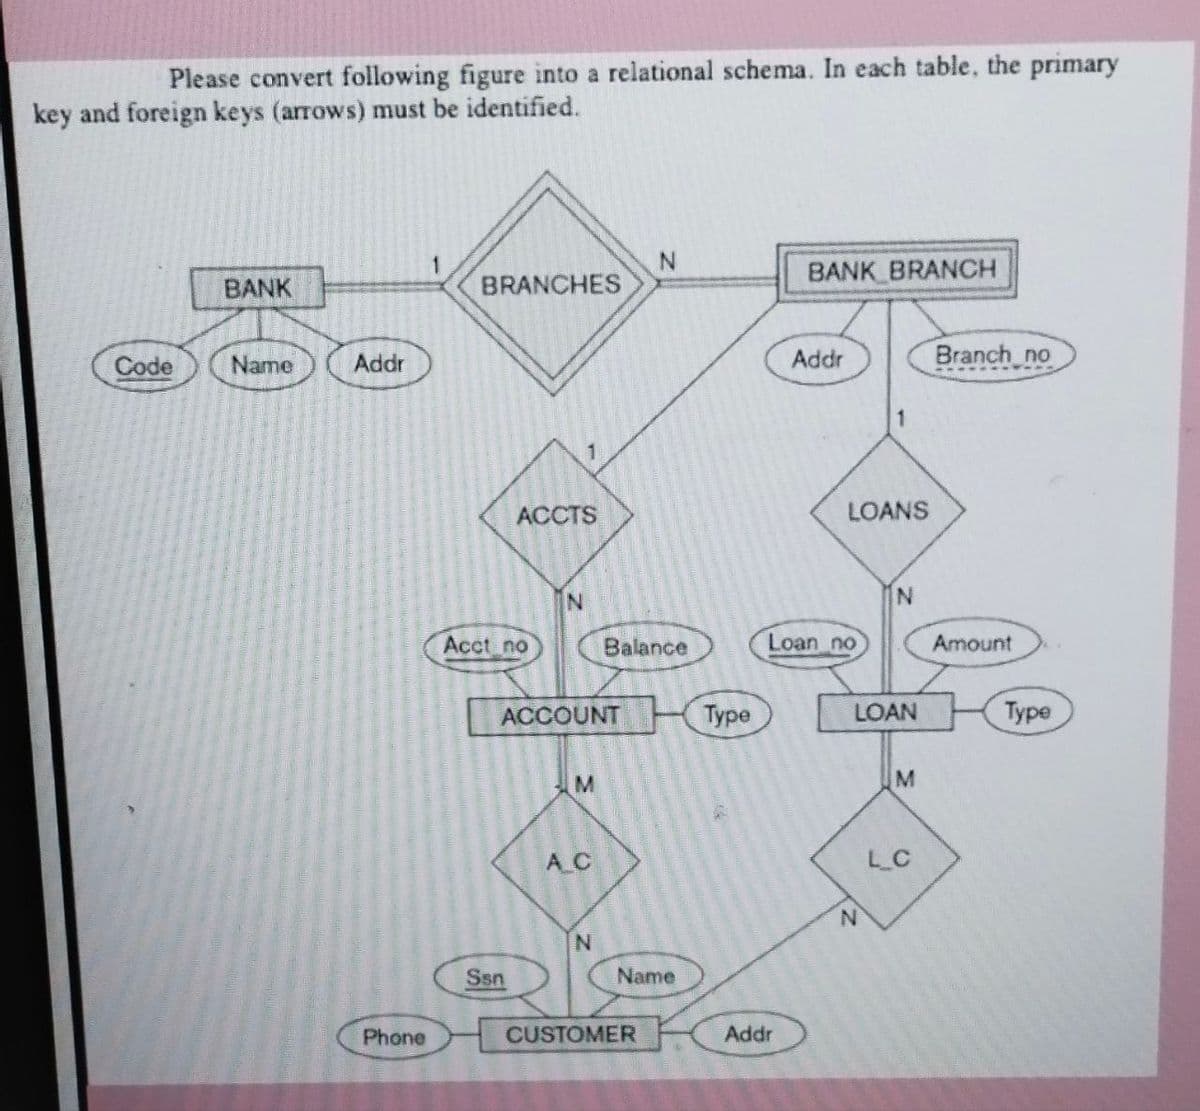 Please convert following figure into a relational schema. In each table, the primary
key and foreign keys (arrows) must be identified.
N.
BRANCHES
BANK BRANCH
BANK
Code
Name
Addr
Addr
Branch no
ACCTS
LOANS
Acct no
Balance
Loan no
Amount
ACCOUNT
Турe
LOAN
Туре
M
M
A C
L C
N.
Ssn
Name
Phone
CUSTOMER
Addr
